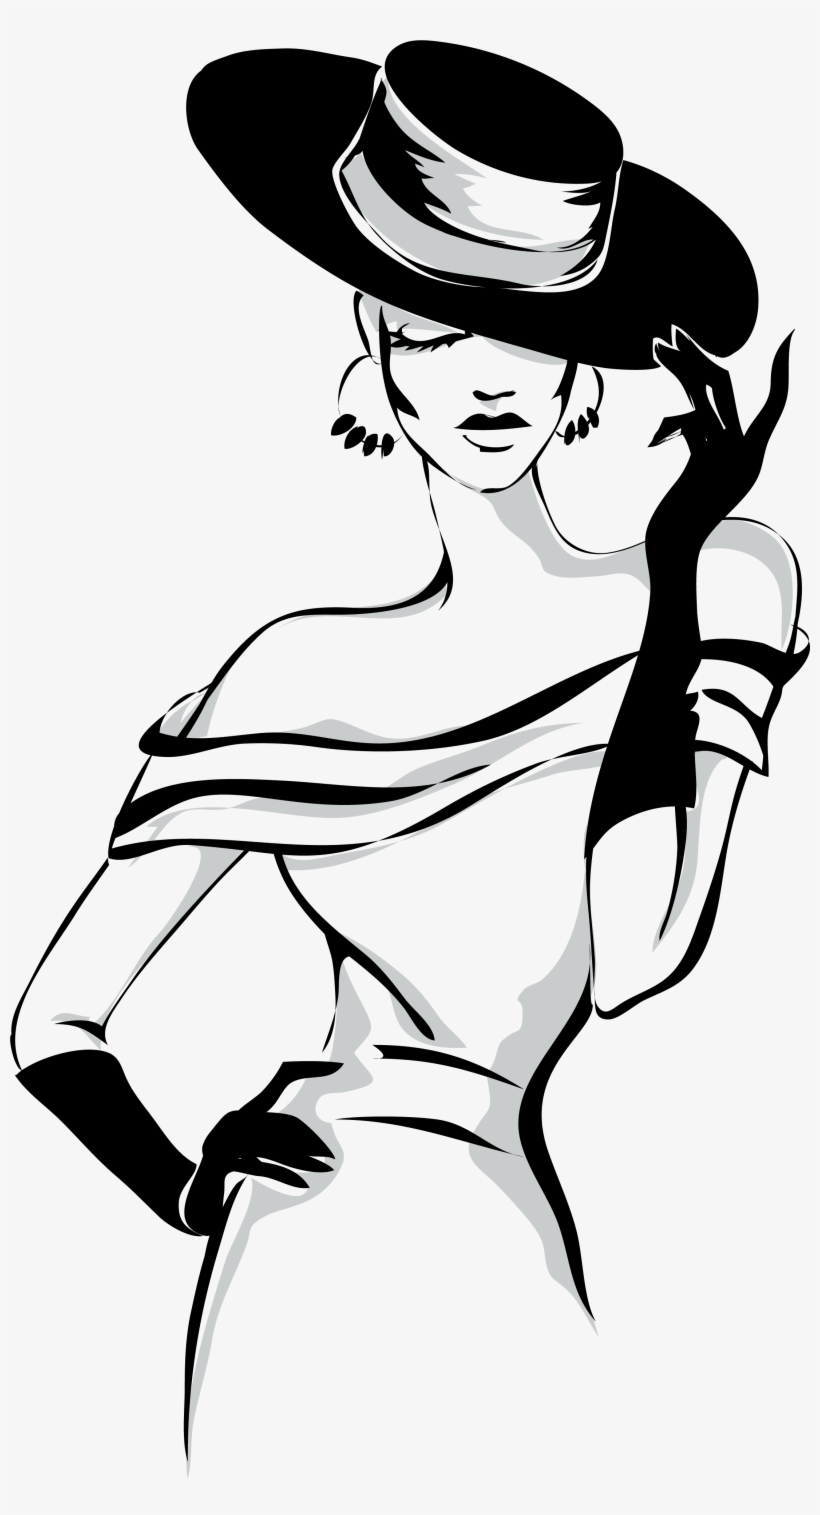 Model Stock Illustration Black And White Girl - Fashion Backgrounds Black And White, transparent png #8010439